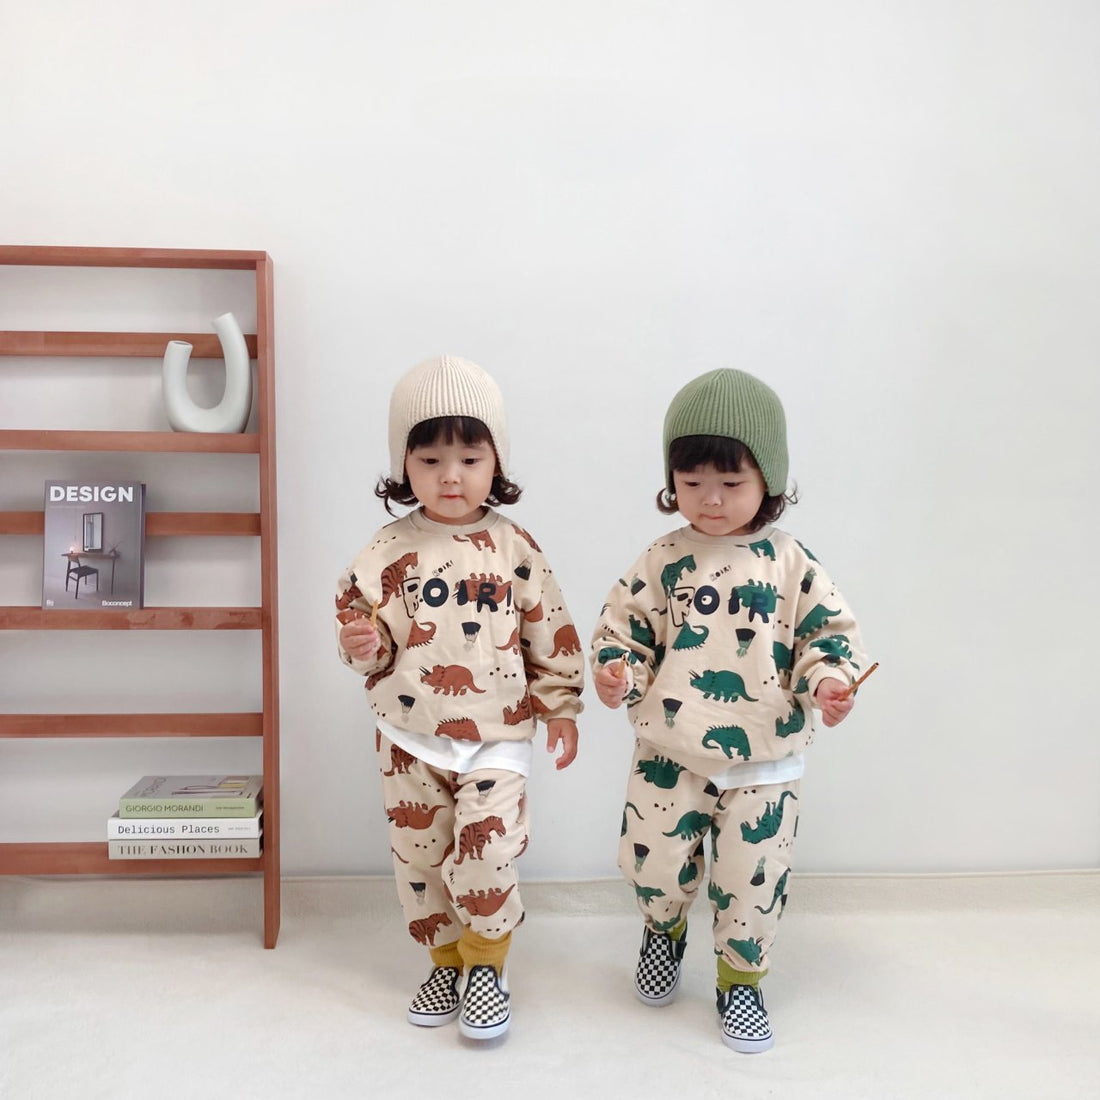 Explore Style with Curious Child's Dinosaur Tracksuit | Fun & Colorful Kids' Fashion